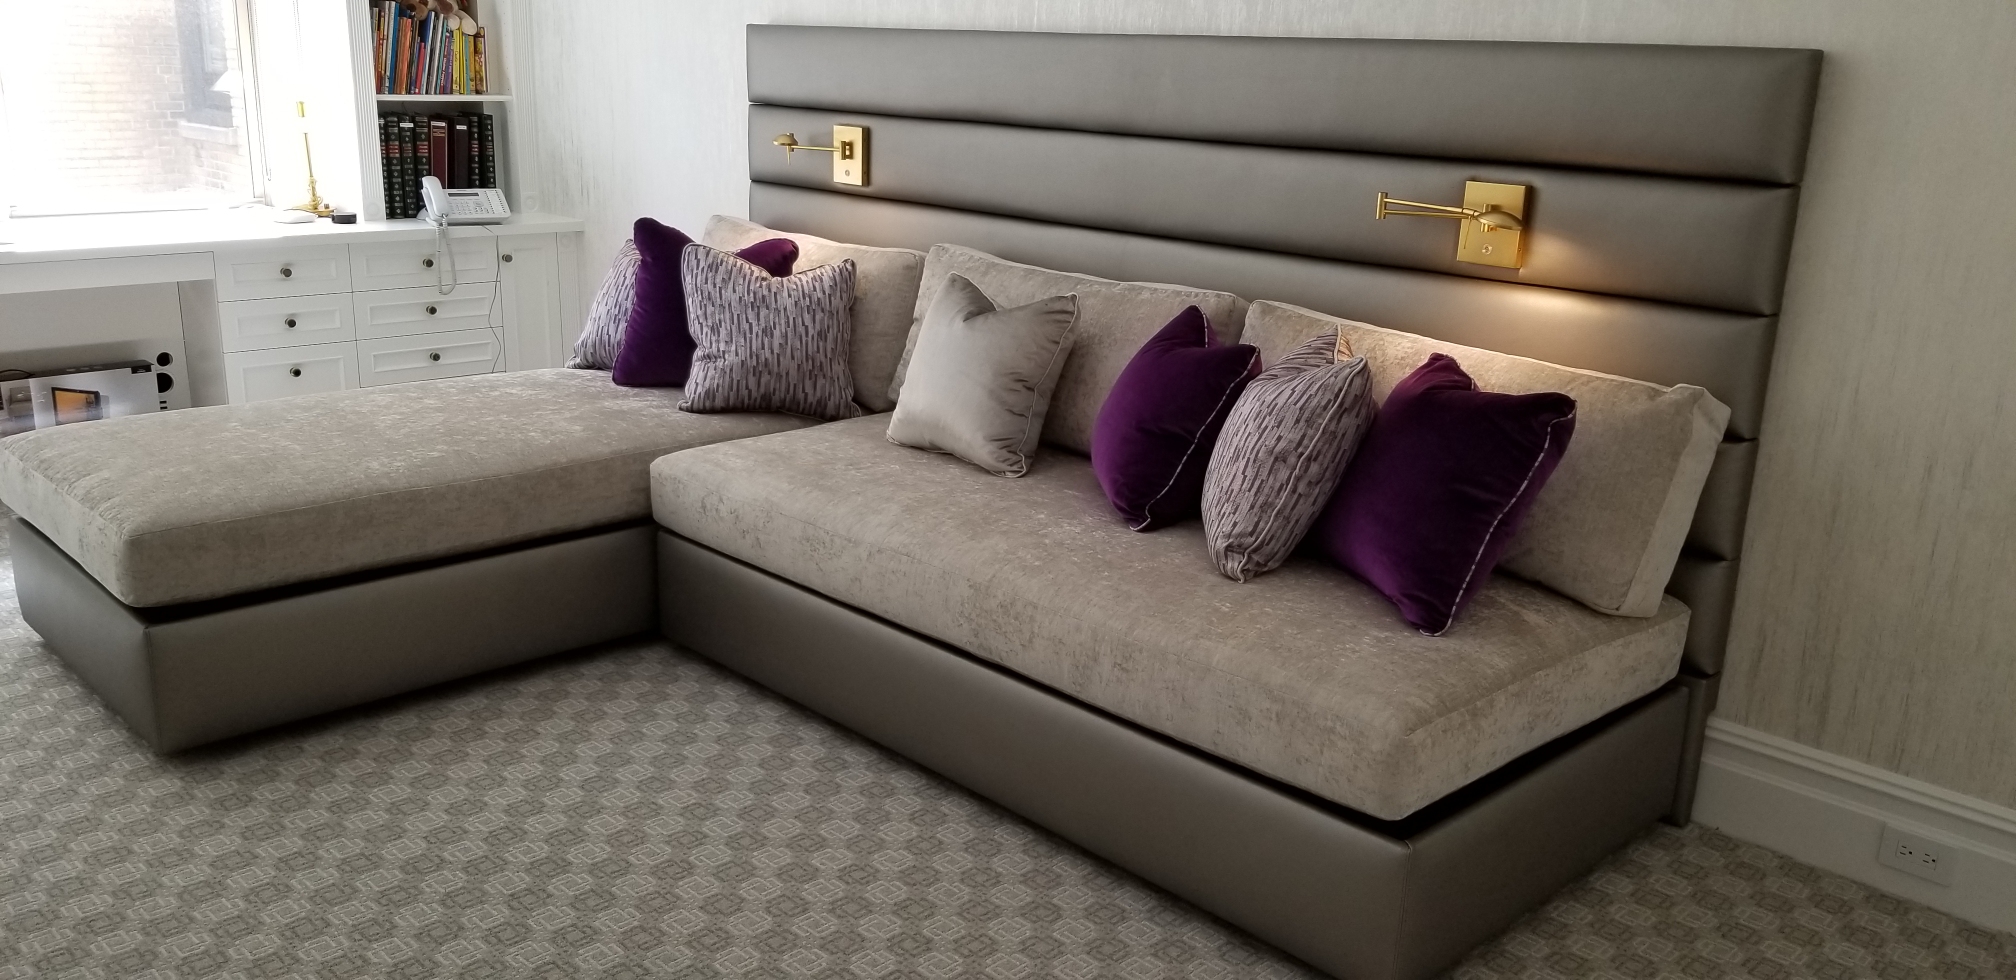 Custom Upholstered daybed with channeling and overhead lights by Bespoke by Luigi Gentile